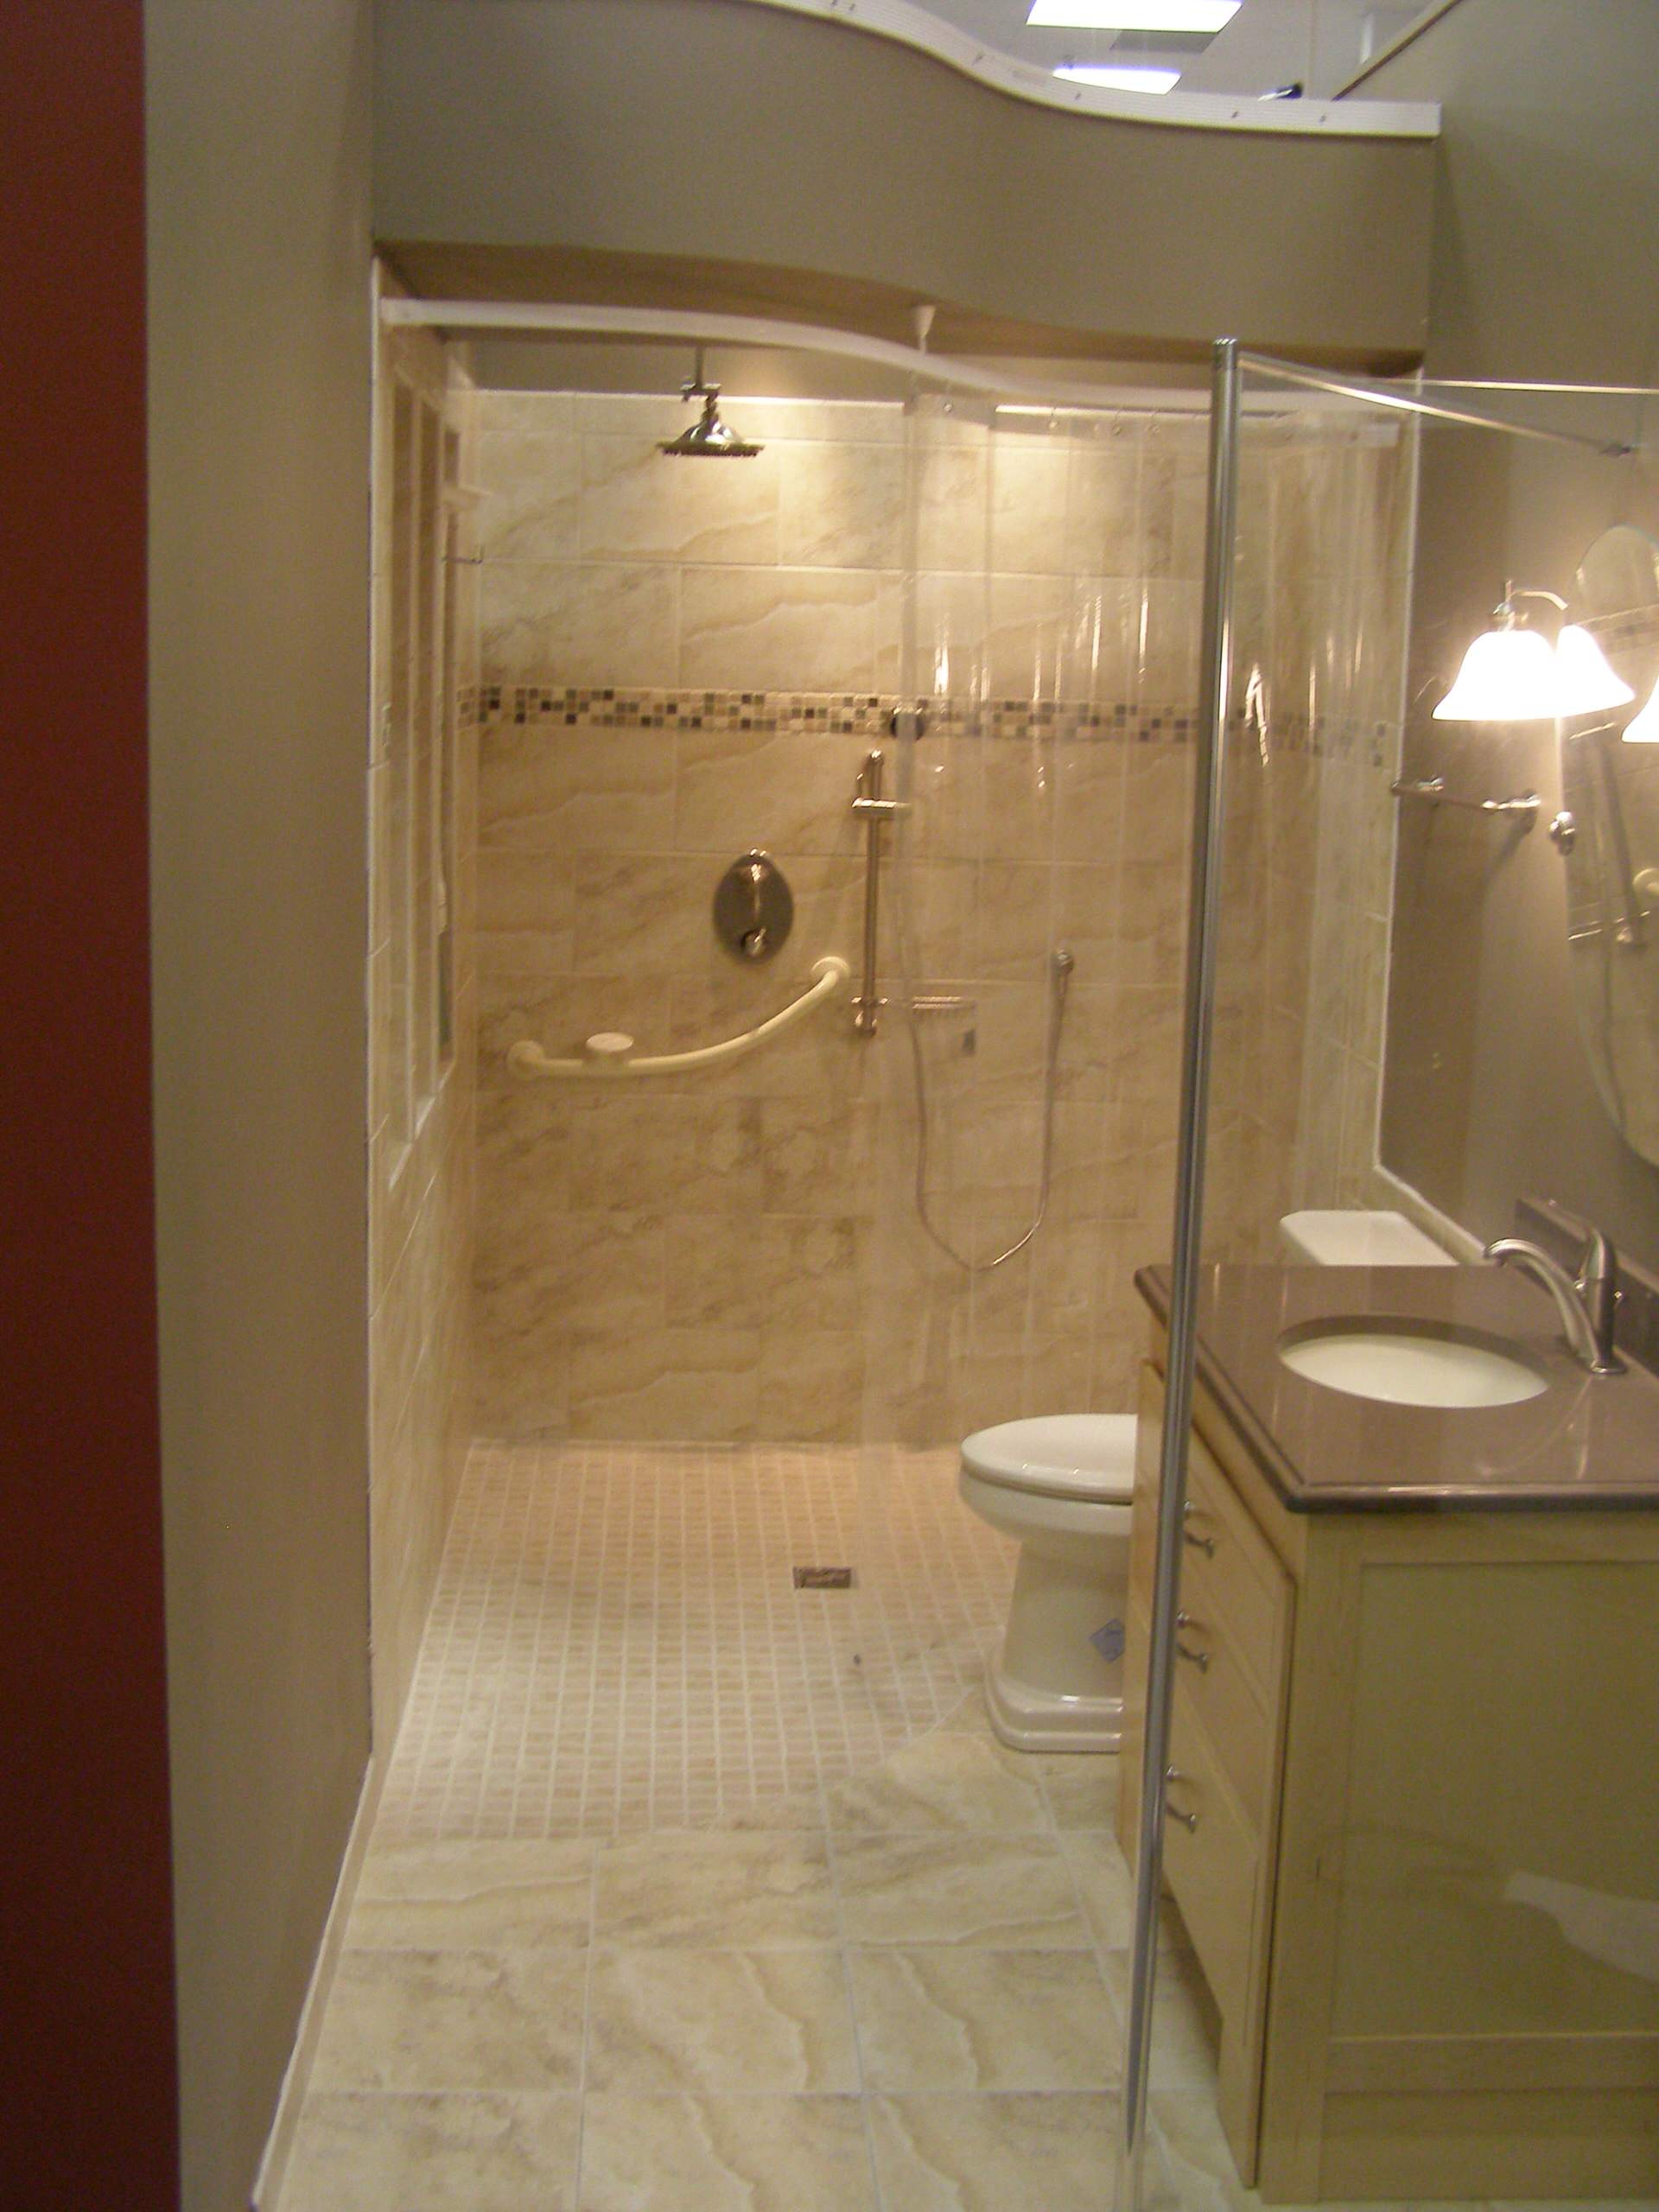 Handicapped Accessible Shower - Photos & Ideas | Houzz